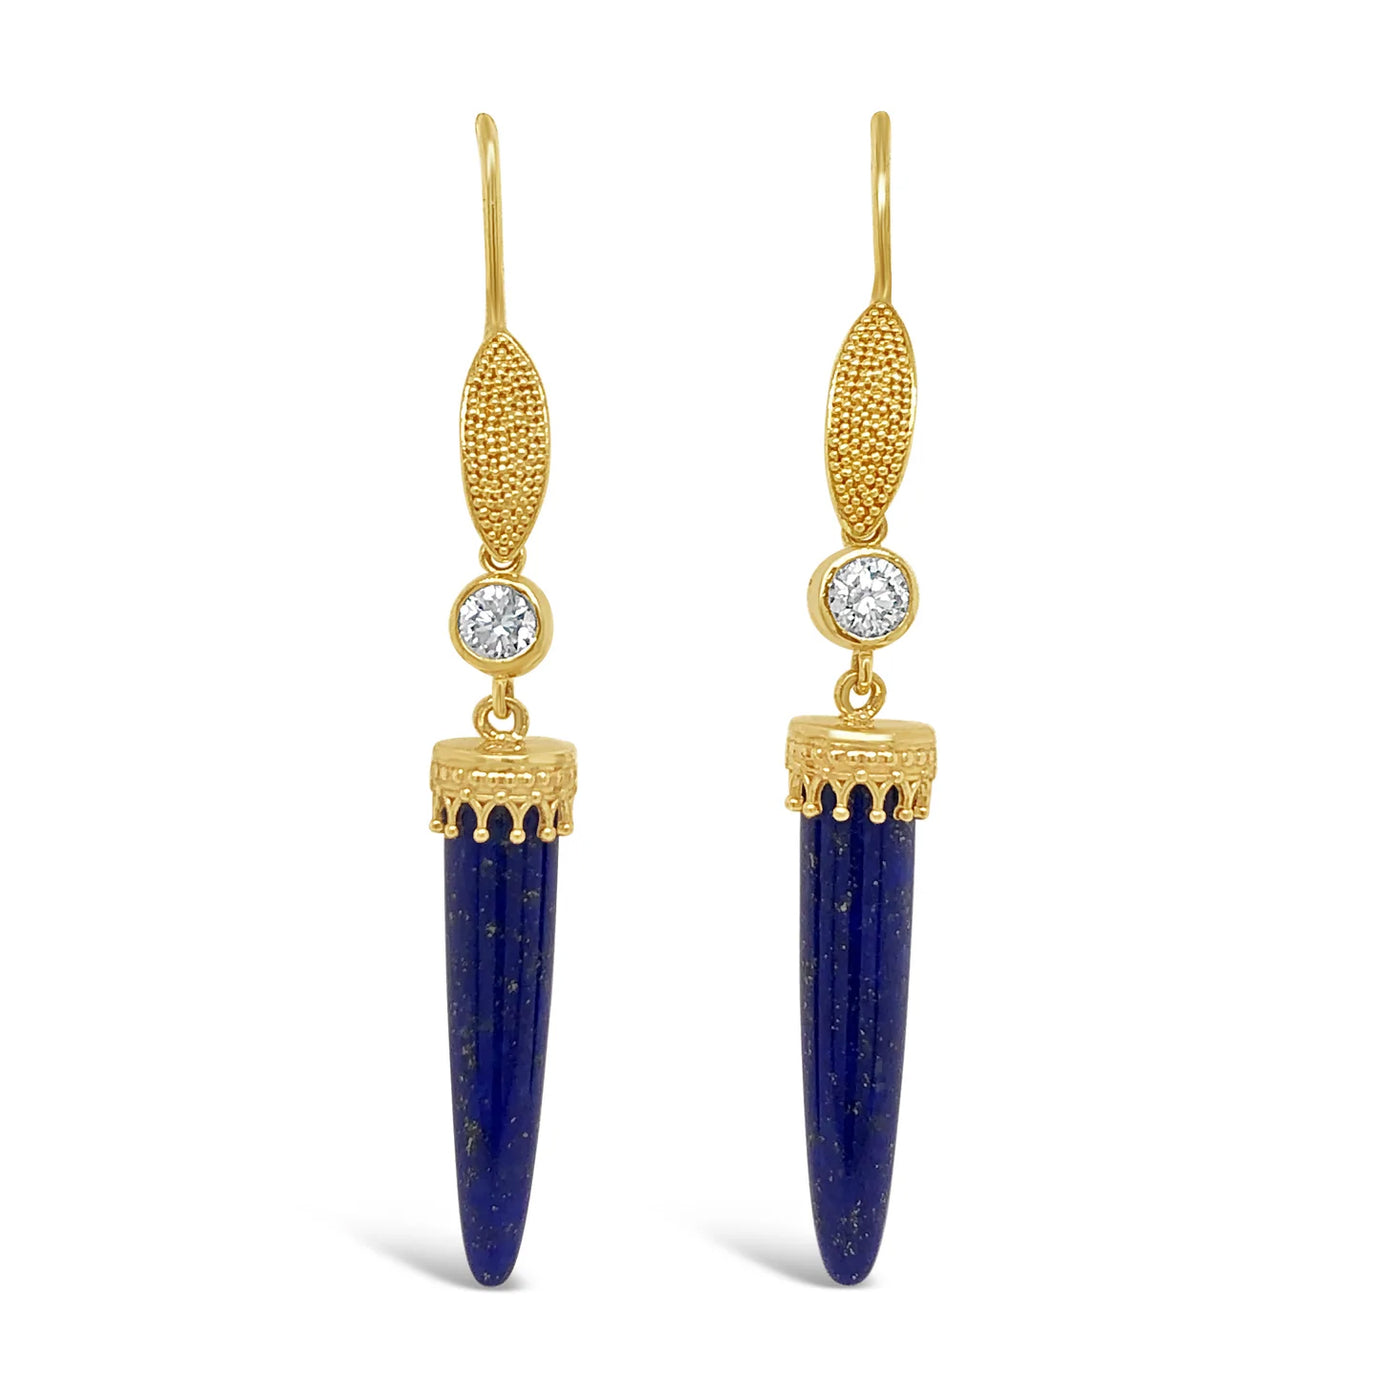 18ky Gold Granulation French Wires with Diamond Earrings